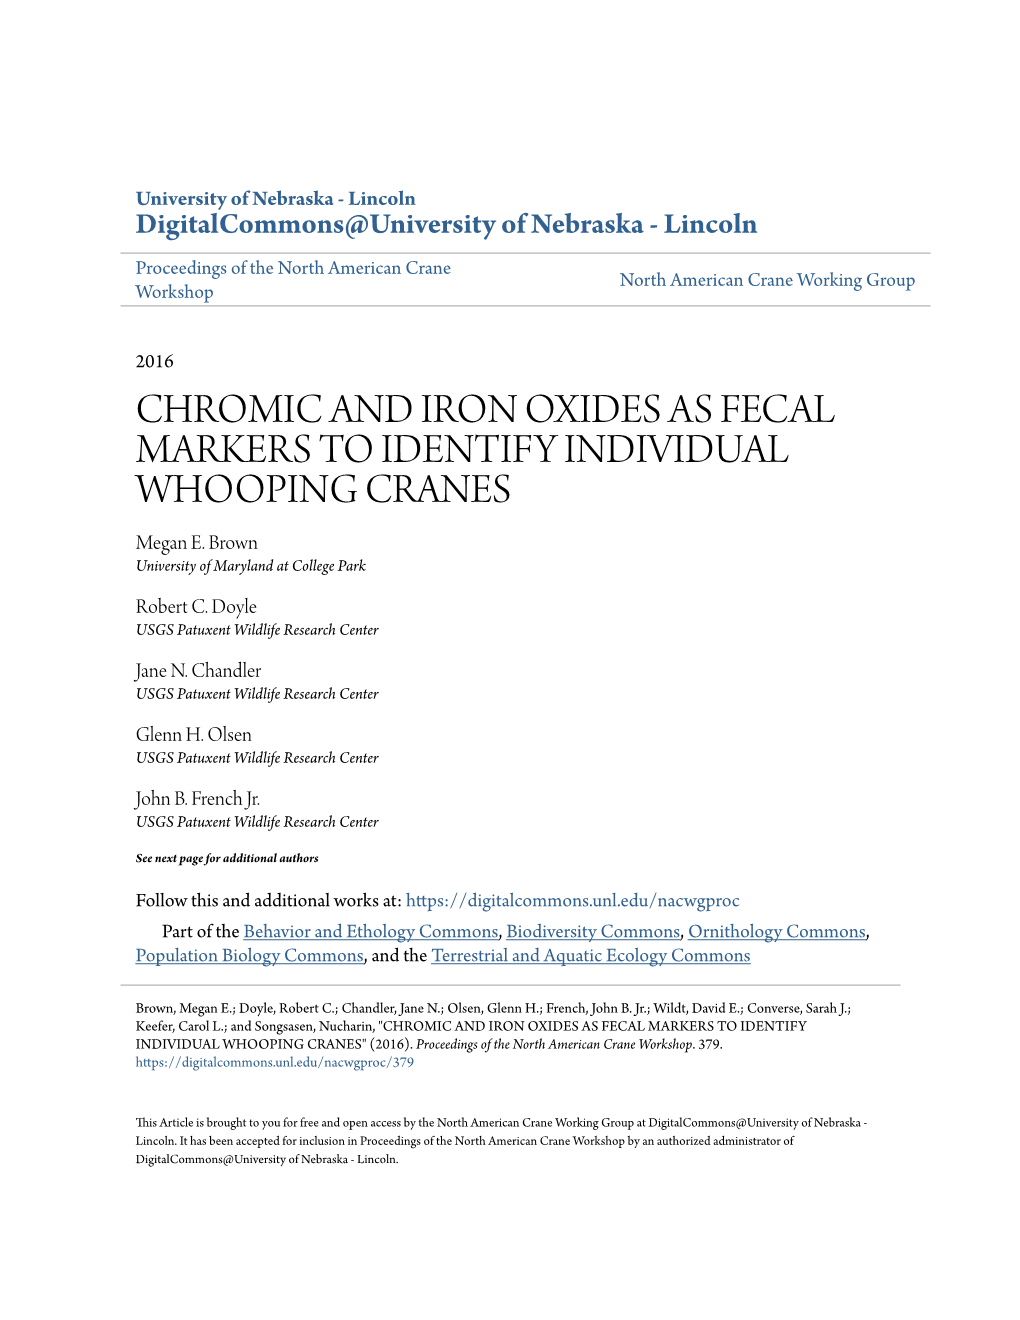 CHROMIC and IRON OXIDES AS FECAL MARKERS to IDENTIFY INDIVIDUAL WHOOPING CRANES Megan E